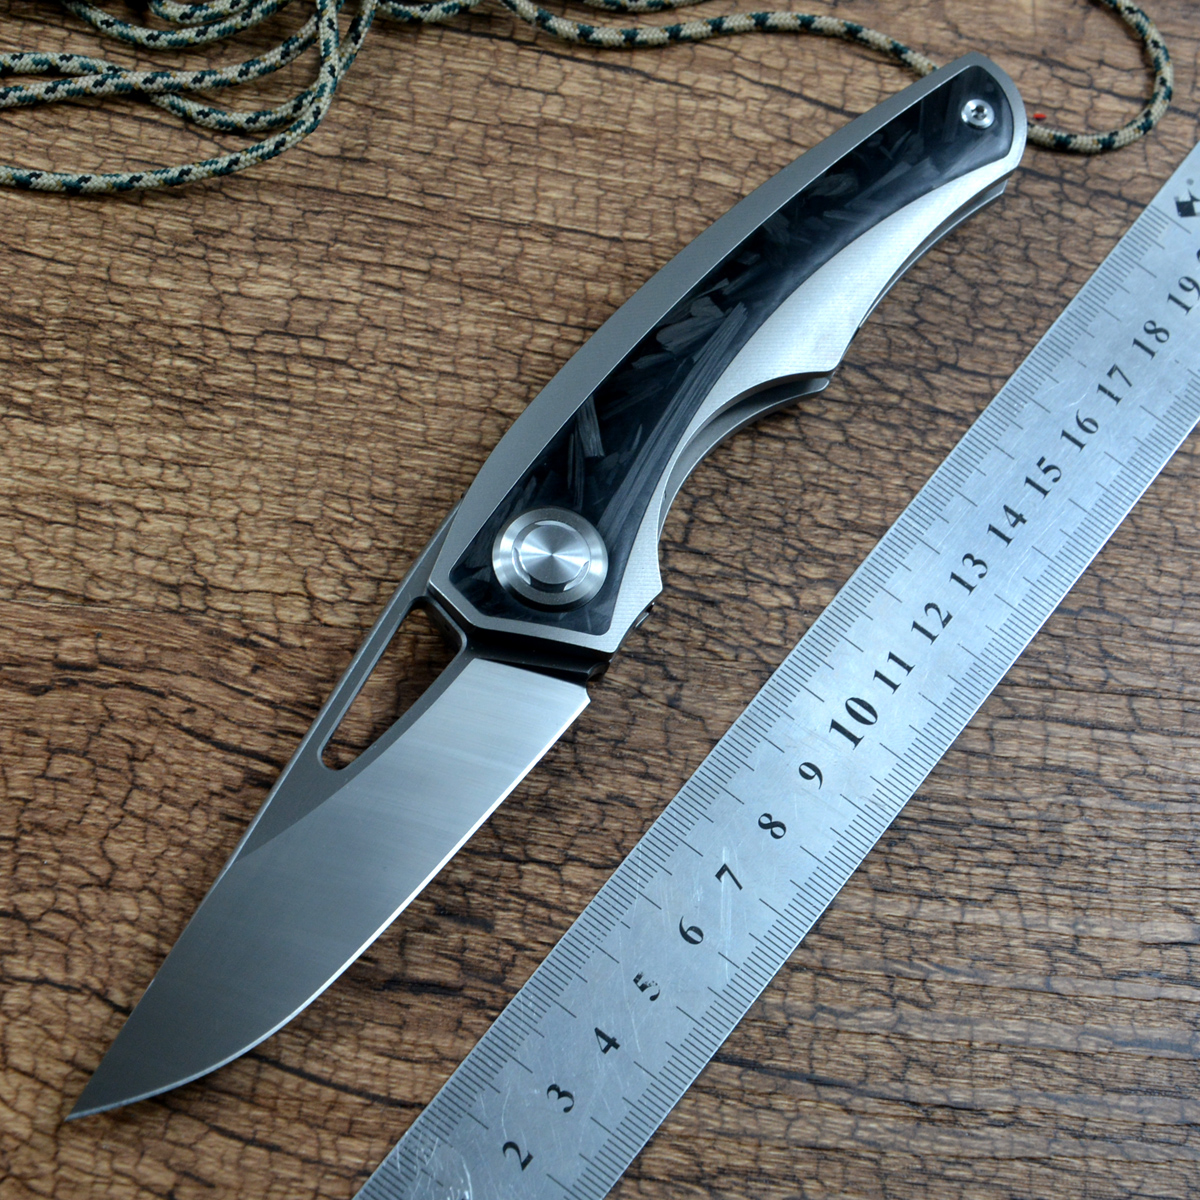 Twosun Quality Gift Pliage Couteaux M390 Blade Tactical Camping Outdoor Survival Hunting Couteau titane Poign￩e avant Open TS186